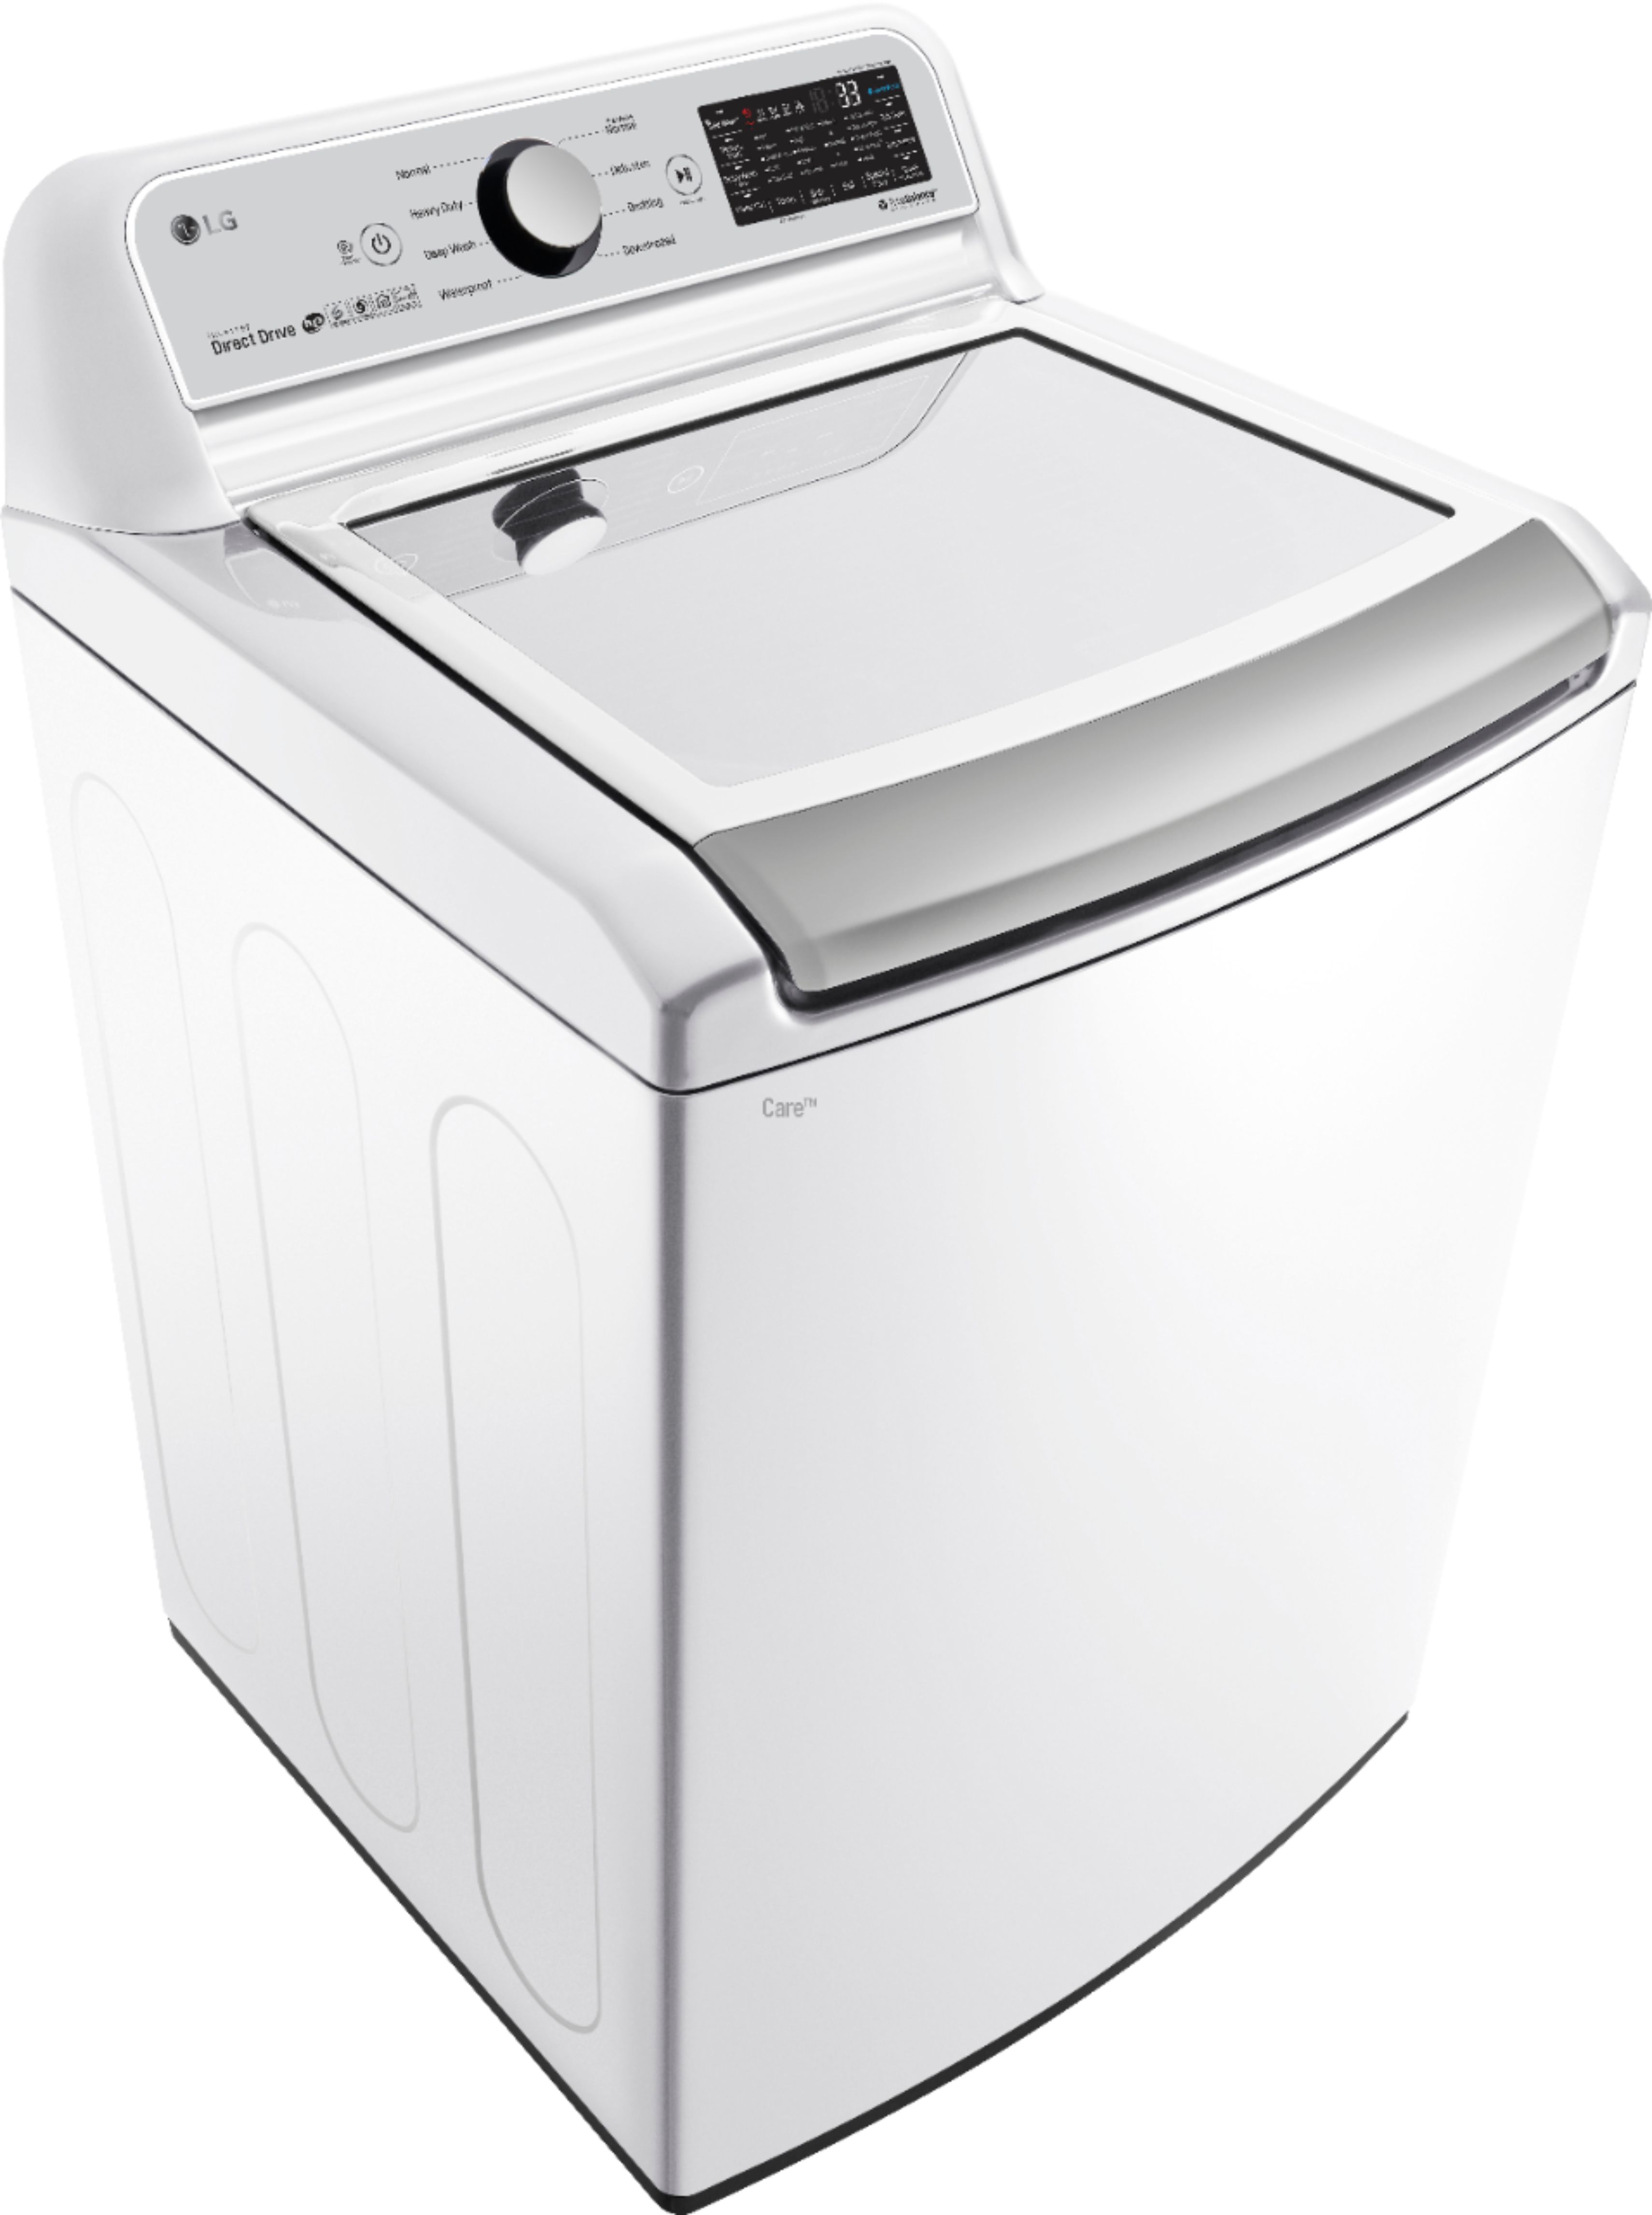 Angle View: LG - 5.0 Cu. Ft. High-Efficiency Smart Top Load Washer with TurboWash3D Technology - White